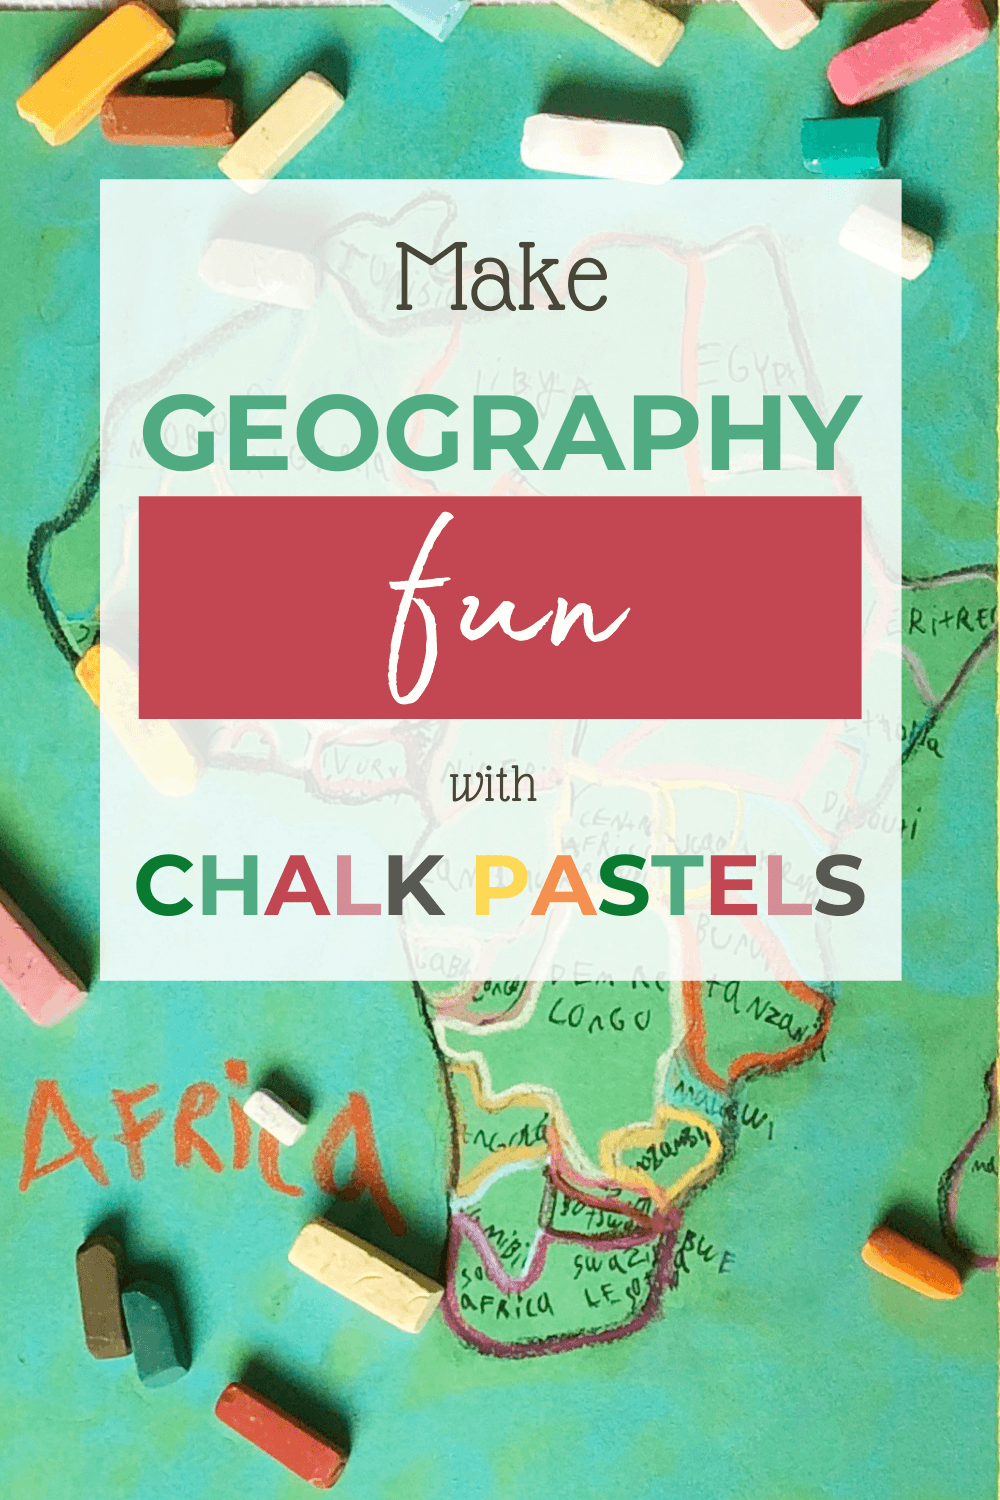 Make Homeschool Geography Fun with Chalk Pastels: Are you looking for a unique way to get your kids excited about maps, continents, countries and world landmarks? Maybe you have a hands-on learner that just needs something a little extra for their cartography lesson. Now you can make geography fun with chalk pastels! #homeschoolgeography #geography #chalkpastels #chalkpastelart #chalkpastelgeography #chalkpastelmaps #homeschoolart 